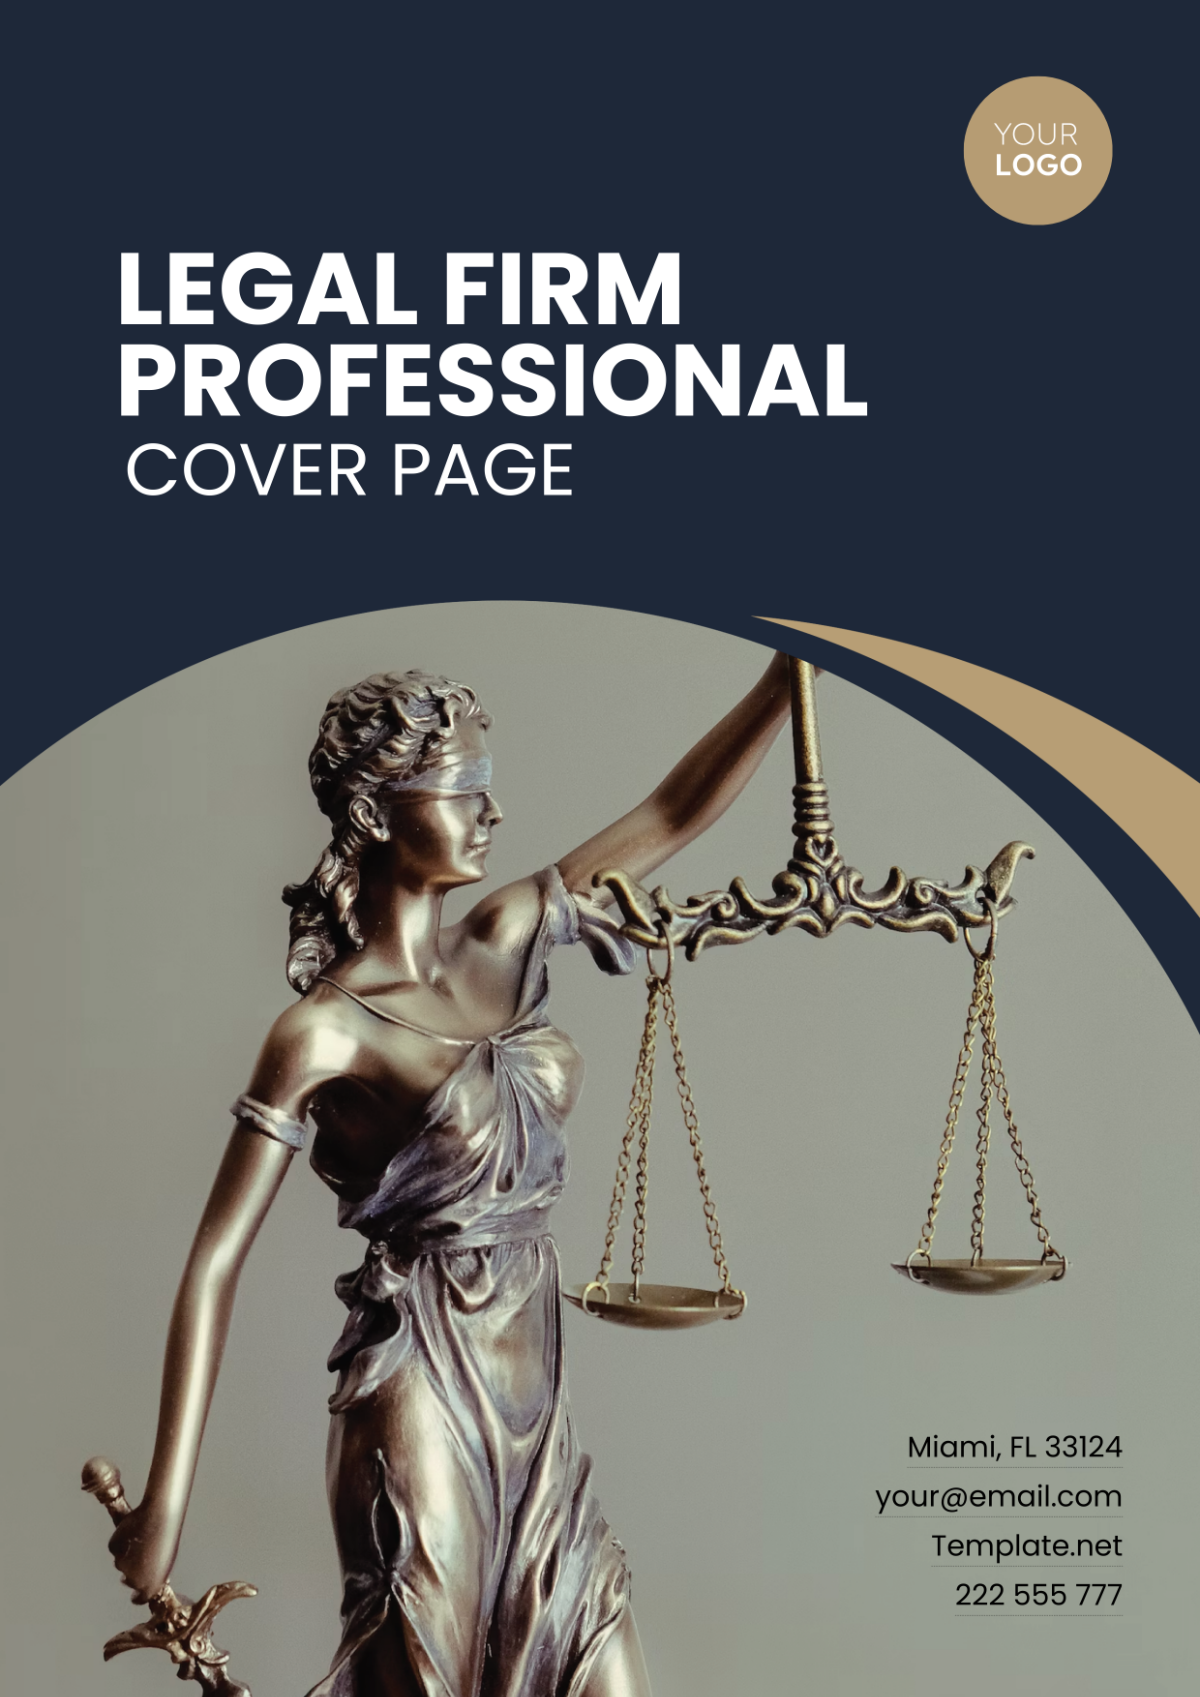 Legal Firm Professional Cover Page Template